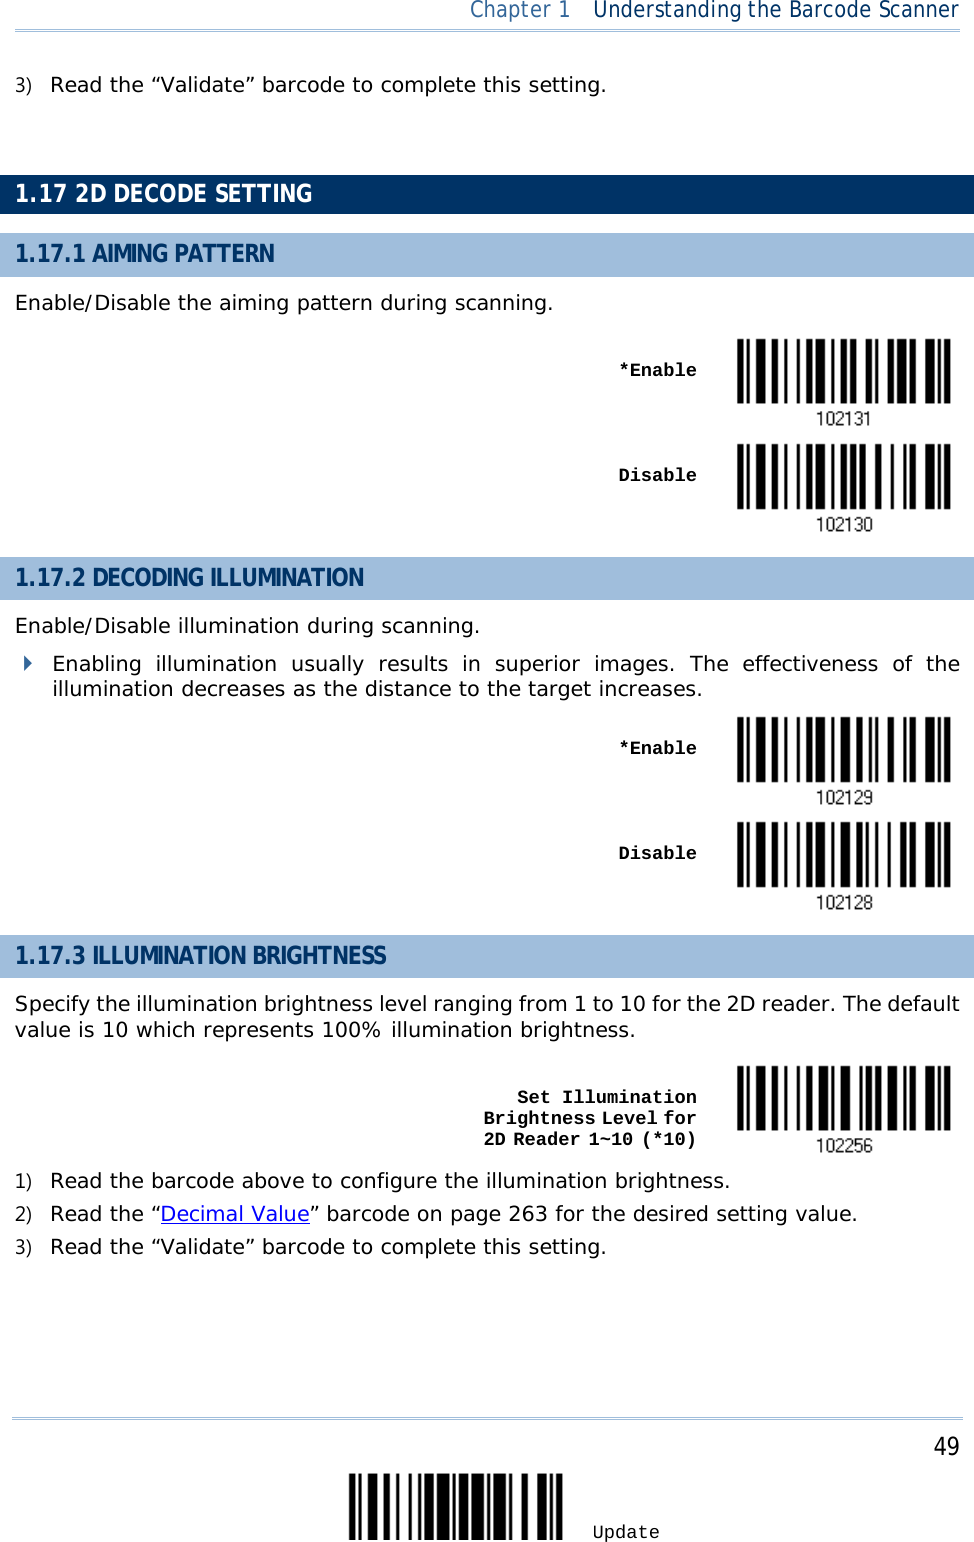  Chapter 1  Understanding the Barcode Scanner  3) Read the “Validate” barcode to complete this setting.   1.17 2D DECODE SETTING 1.17.1 AIMING PATTERN Enable/Disable the aiming pattern during scanning.    *Enable     Disable  1.17.2 DECODING ILLUMINATION Enable/Disable illumination during scanning.  Enabling illumination usually results in superior images. The effectiveness of the illumination decreases as the distance to the target increases.    *Enable     Disable  1.17.3 ILLUMINATION BRIGHTNESS Specify the illumination brightness level ranging from 1 to 10 for the 2D reader. The default value is 10 which represents 100% illumination brightness.    Set Illumination Brightness Level for  2D Reader 1~10 (*10)  1) Read the barcode above to configure the illumination brightness. 2) Read the “Decimal Value” barcode on page 263 for the desired setting value. 3) Read the “Validate” barcode to complete this setting.        49 Update 